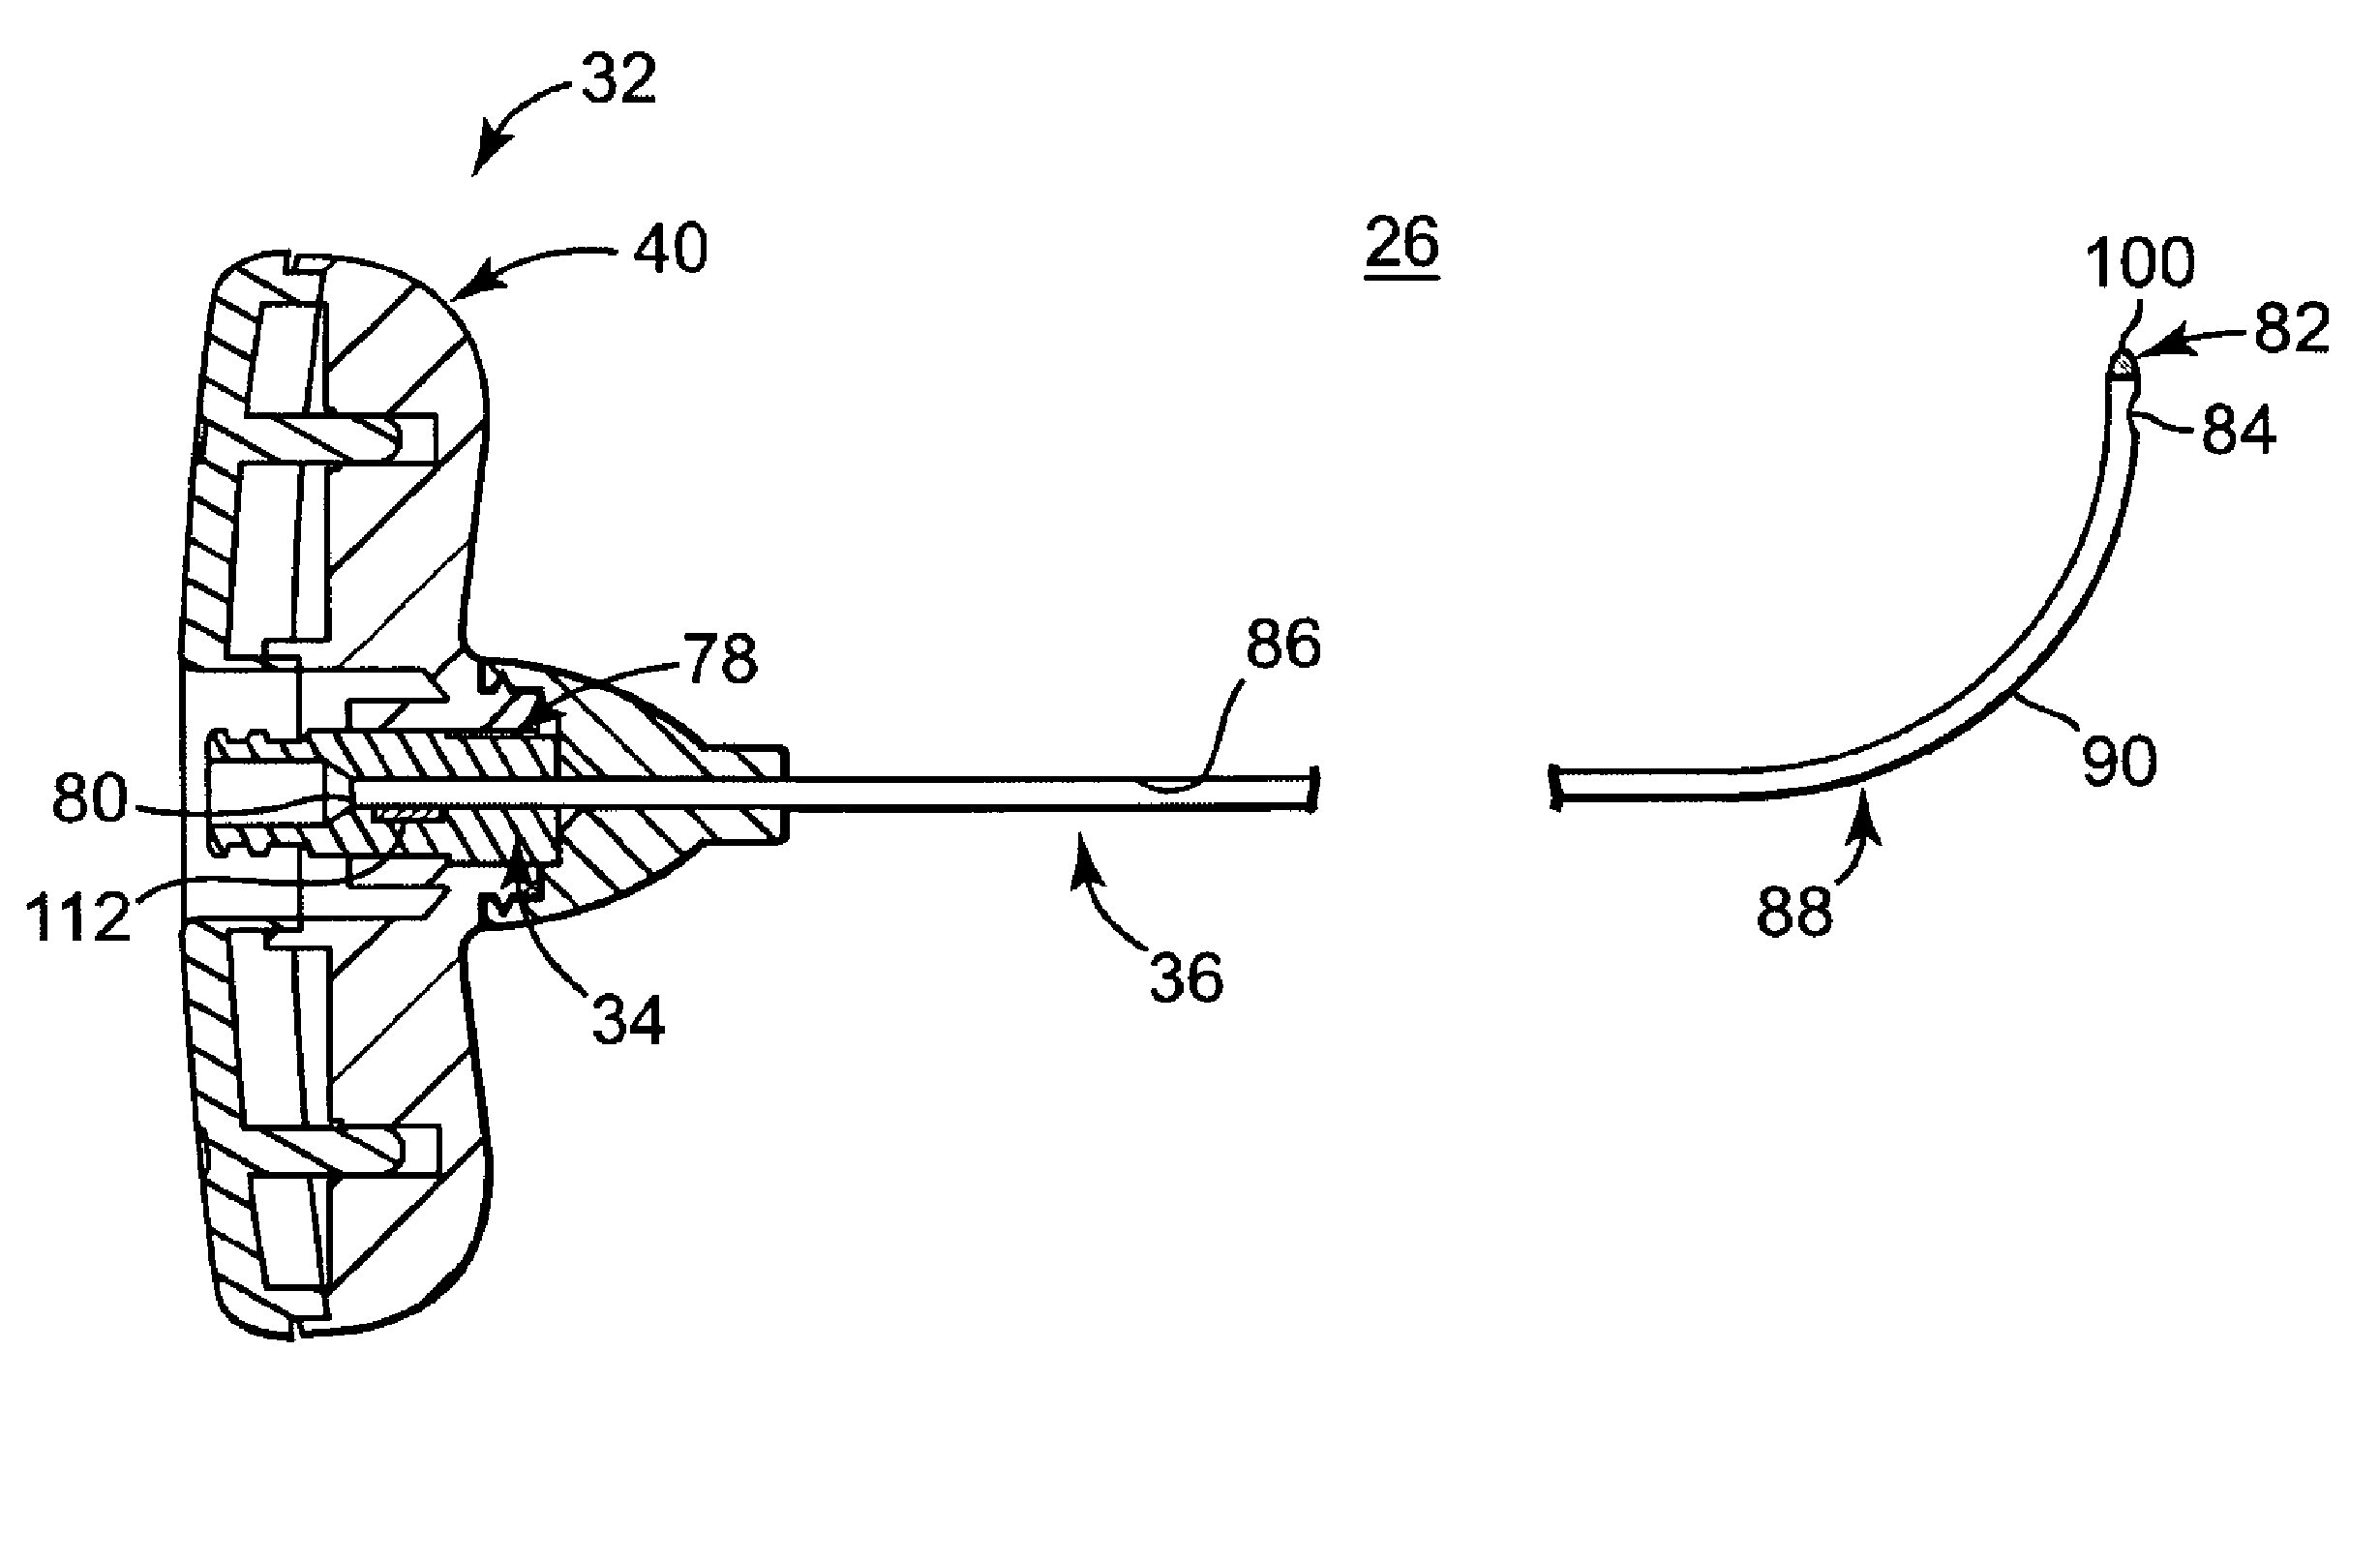 Device, system and method for delivering a curable material into bone